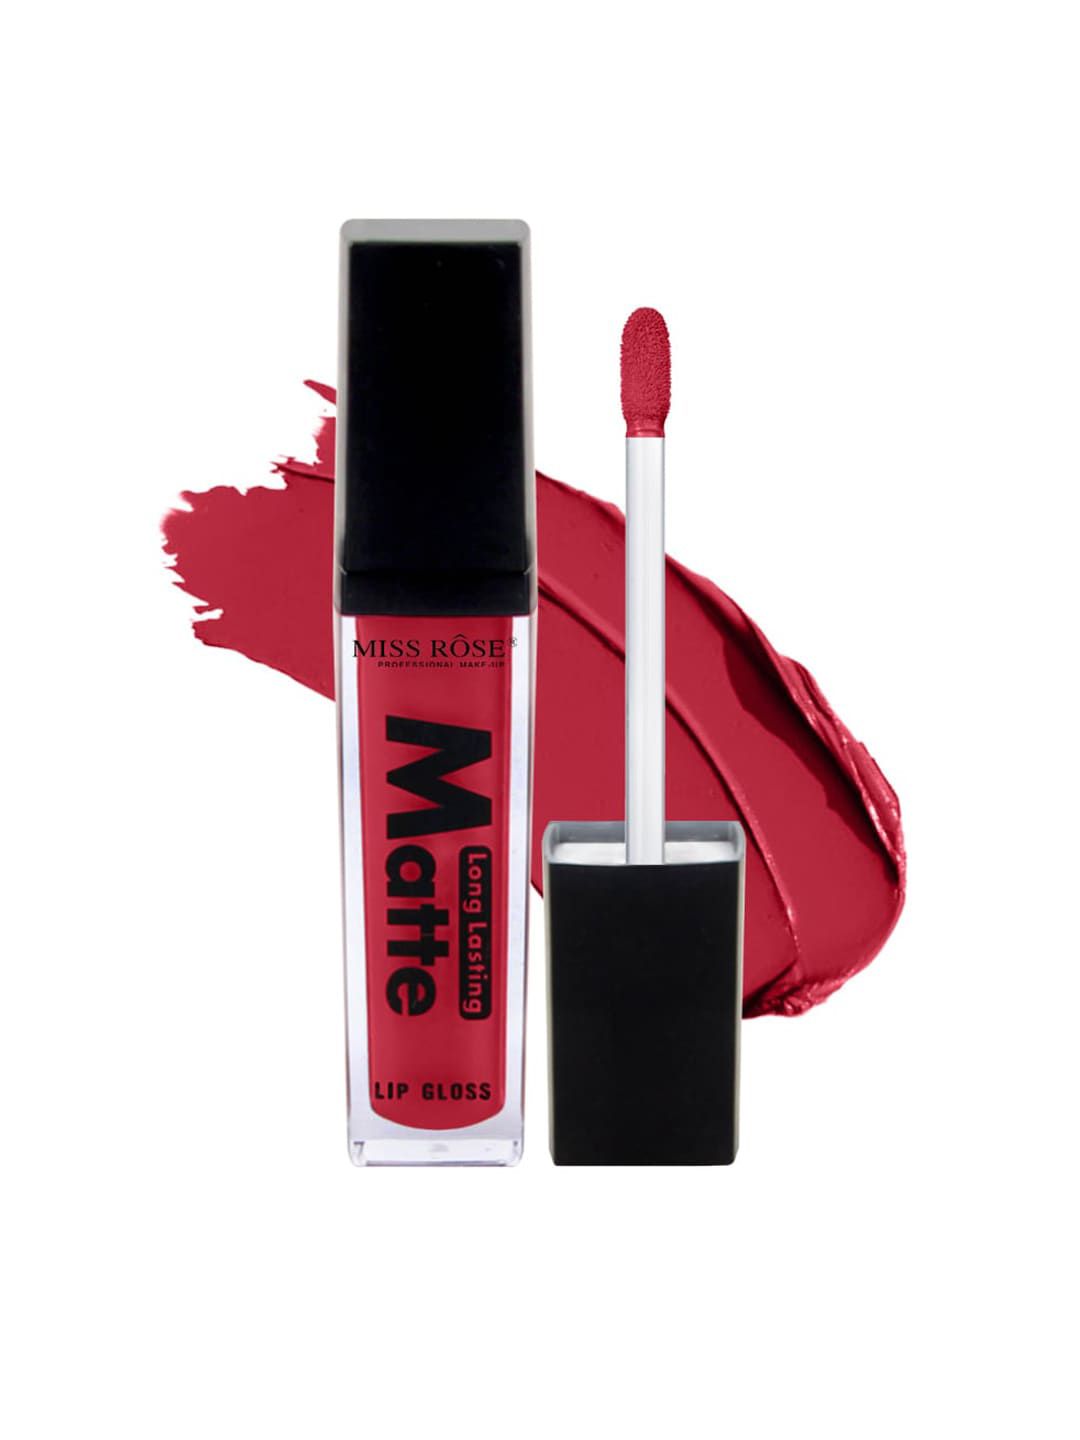 MISS ROSE Matte Long Lasting LipGloss 7701-002M 19 20 gm Price in India